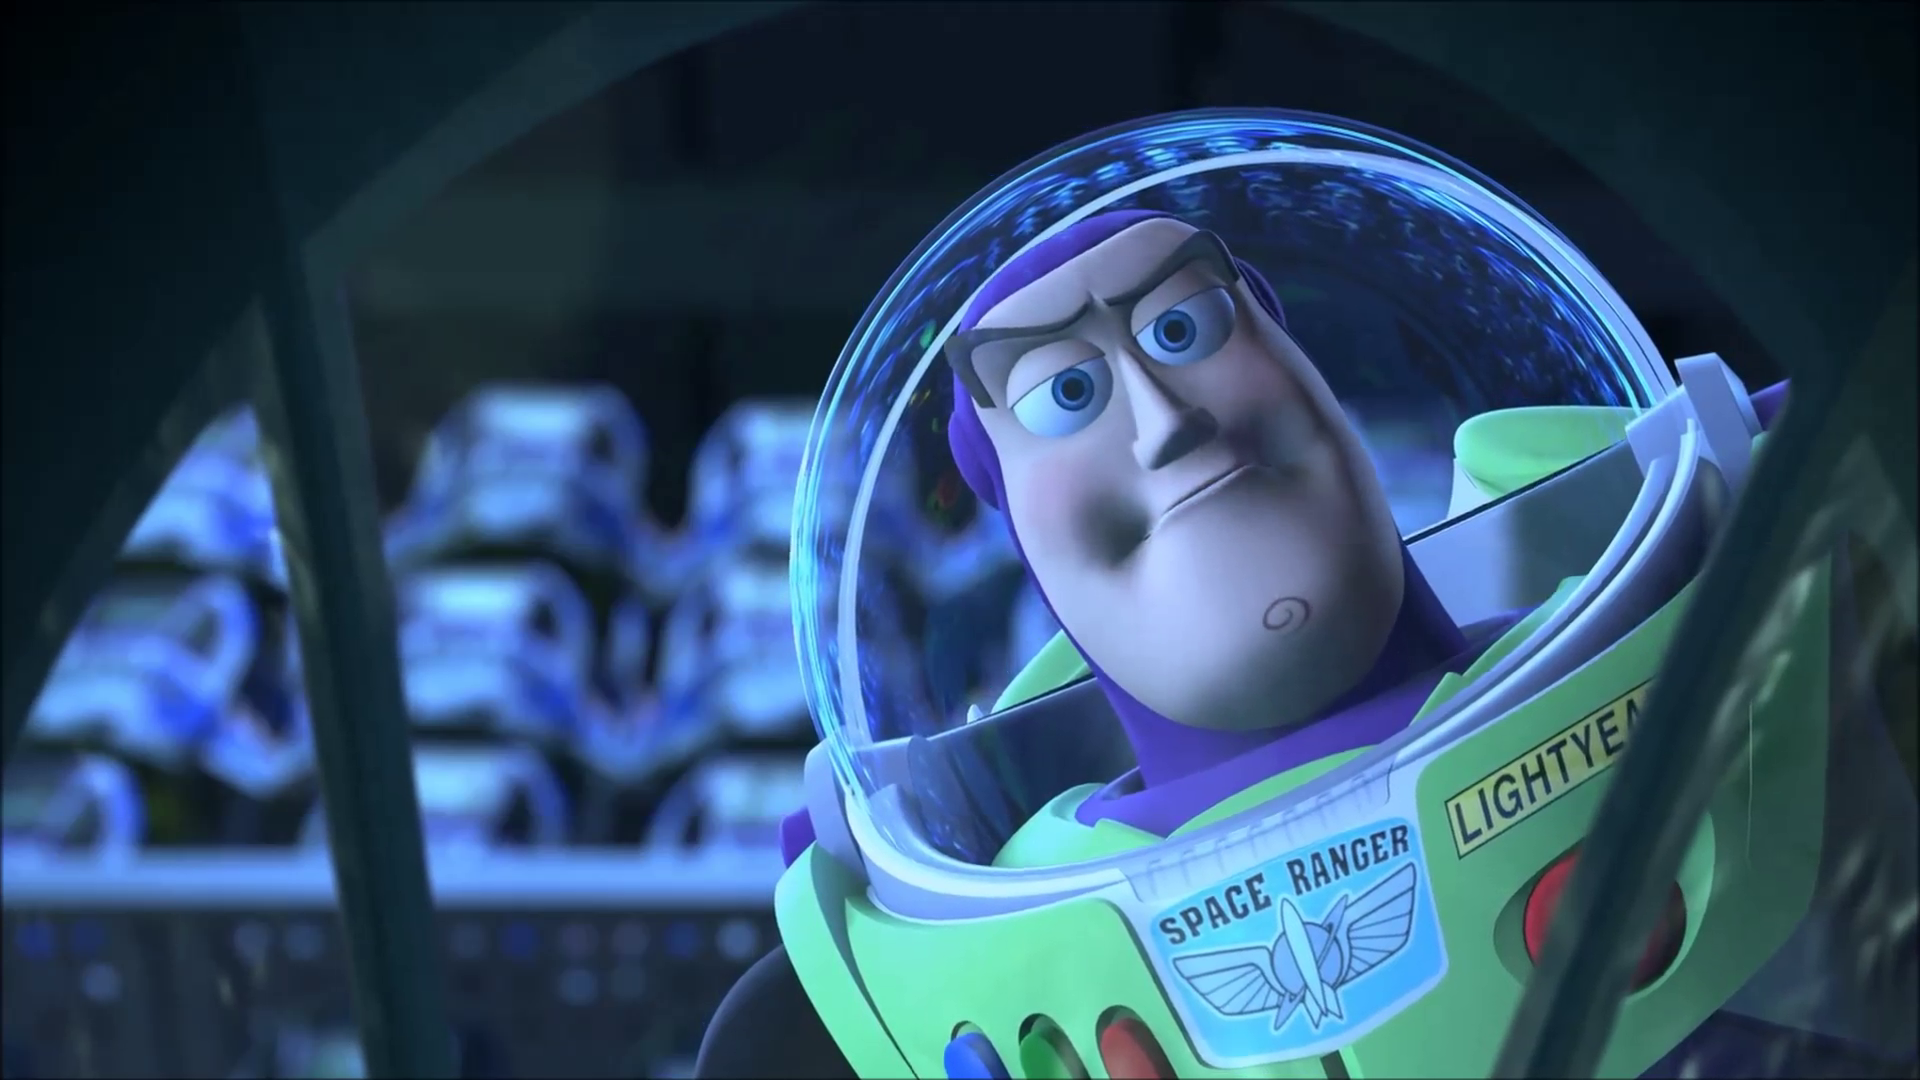 Buzz Lightyear Wallpaper Pictures 5gnv51a2   Yoanucom